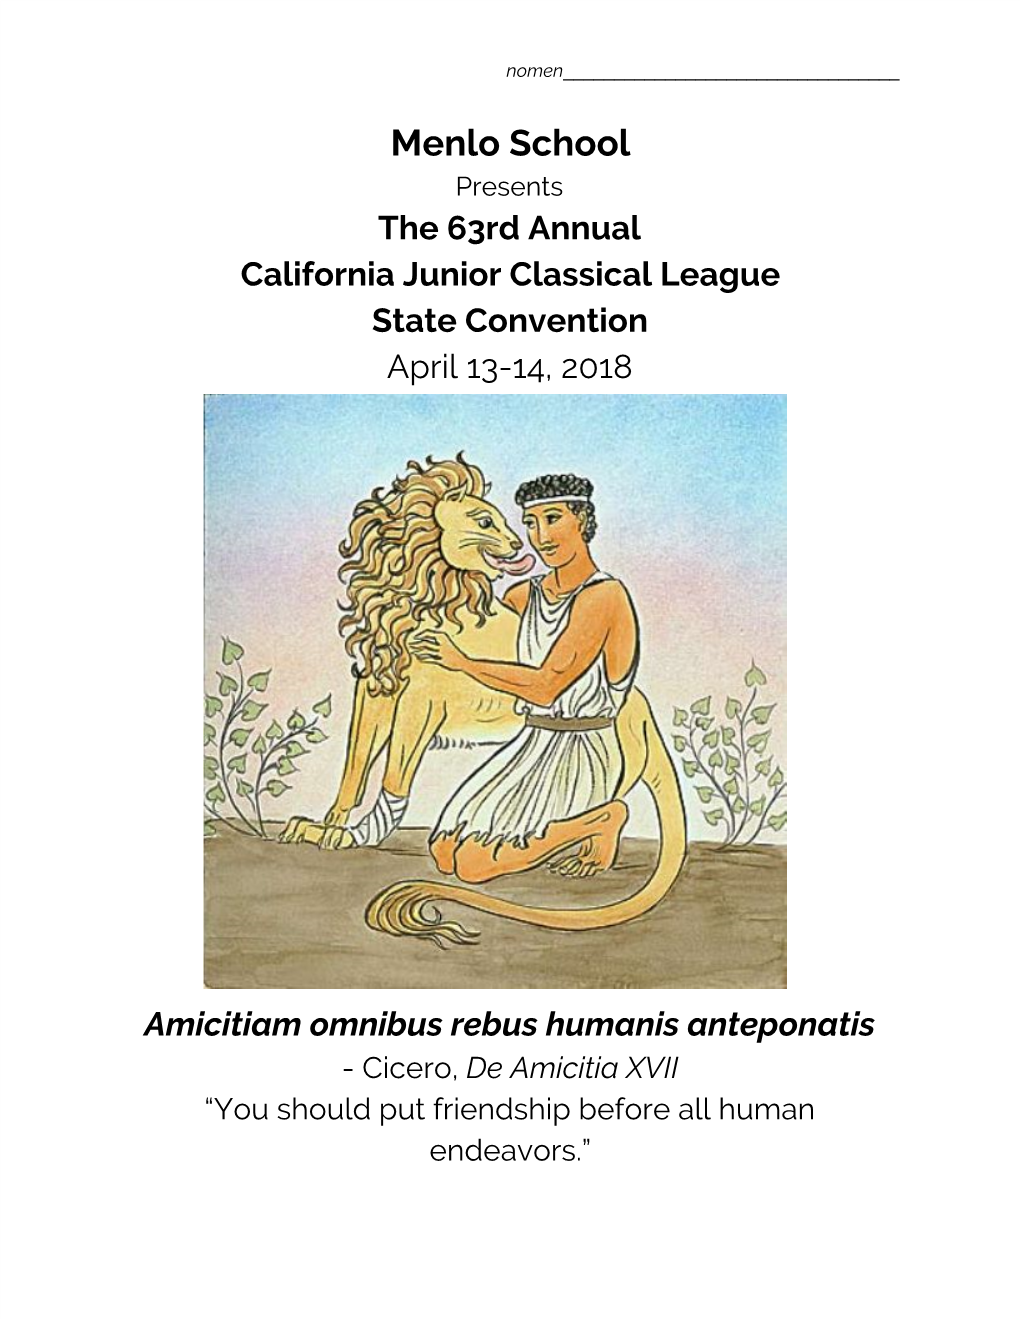 The 63Rd Annual California Junior Classical League State Convention April 13-14, 2018